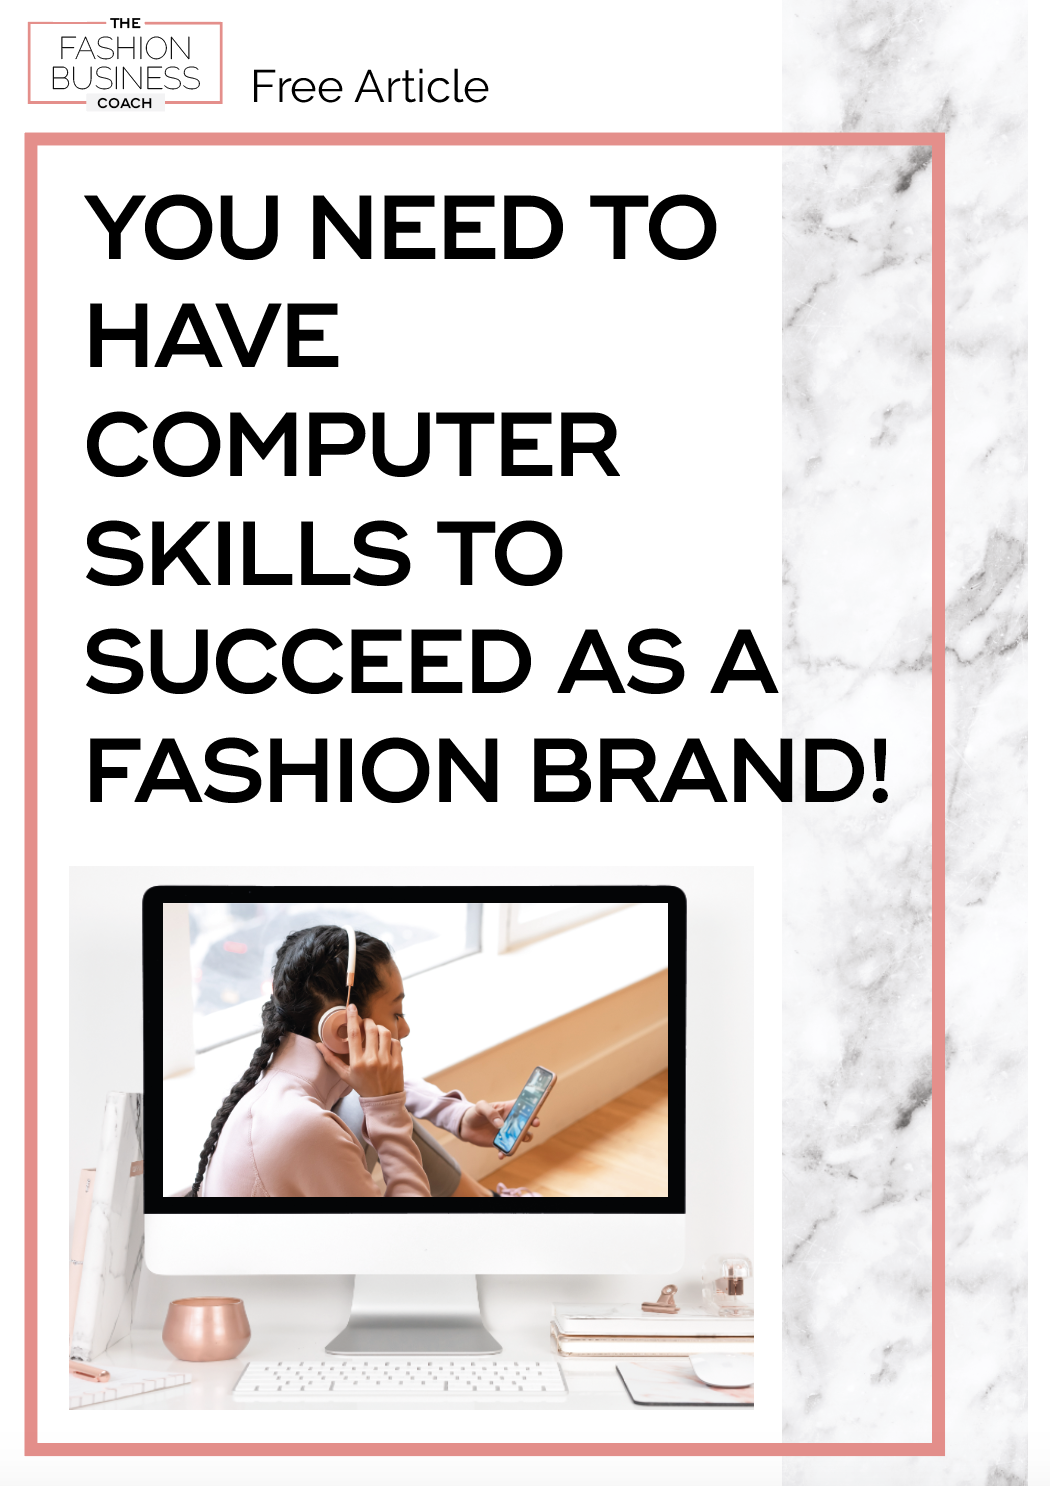 You need to have computer skills to succeed as a fashion brand! 2.png